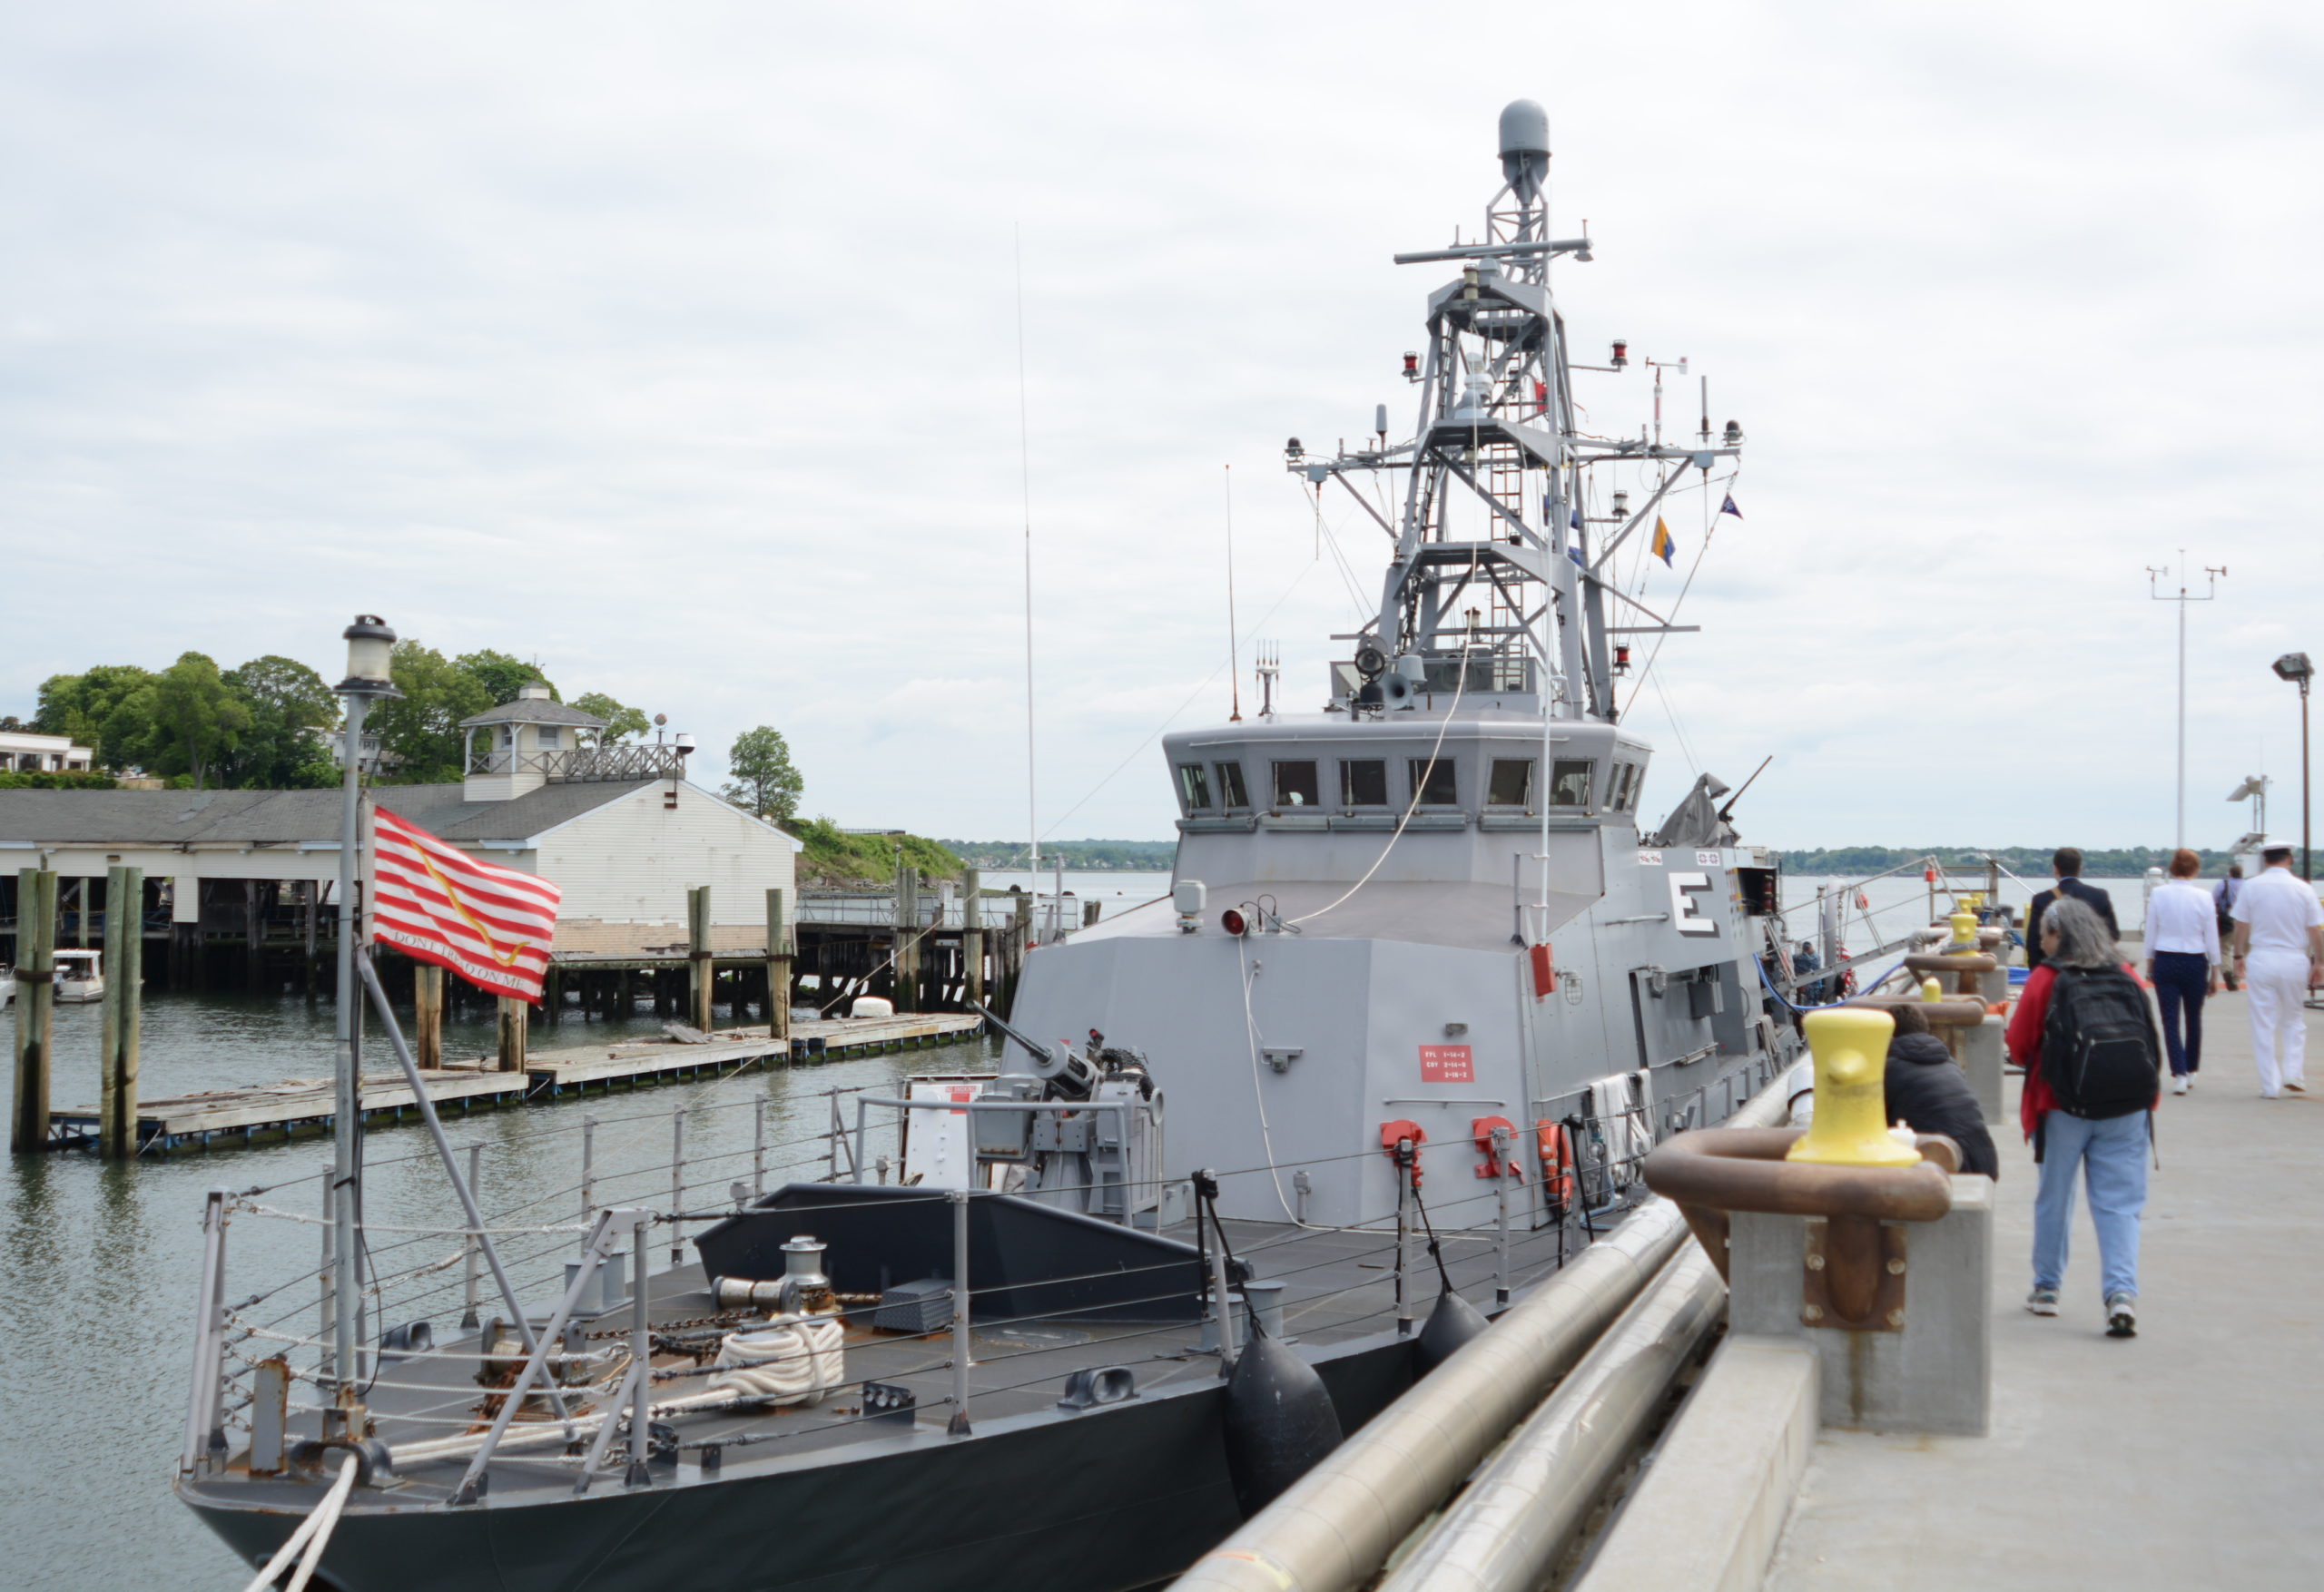 The USS Zephyr docked ashore at Kings Point in 2017. (Photo by Janelle Clausen)